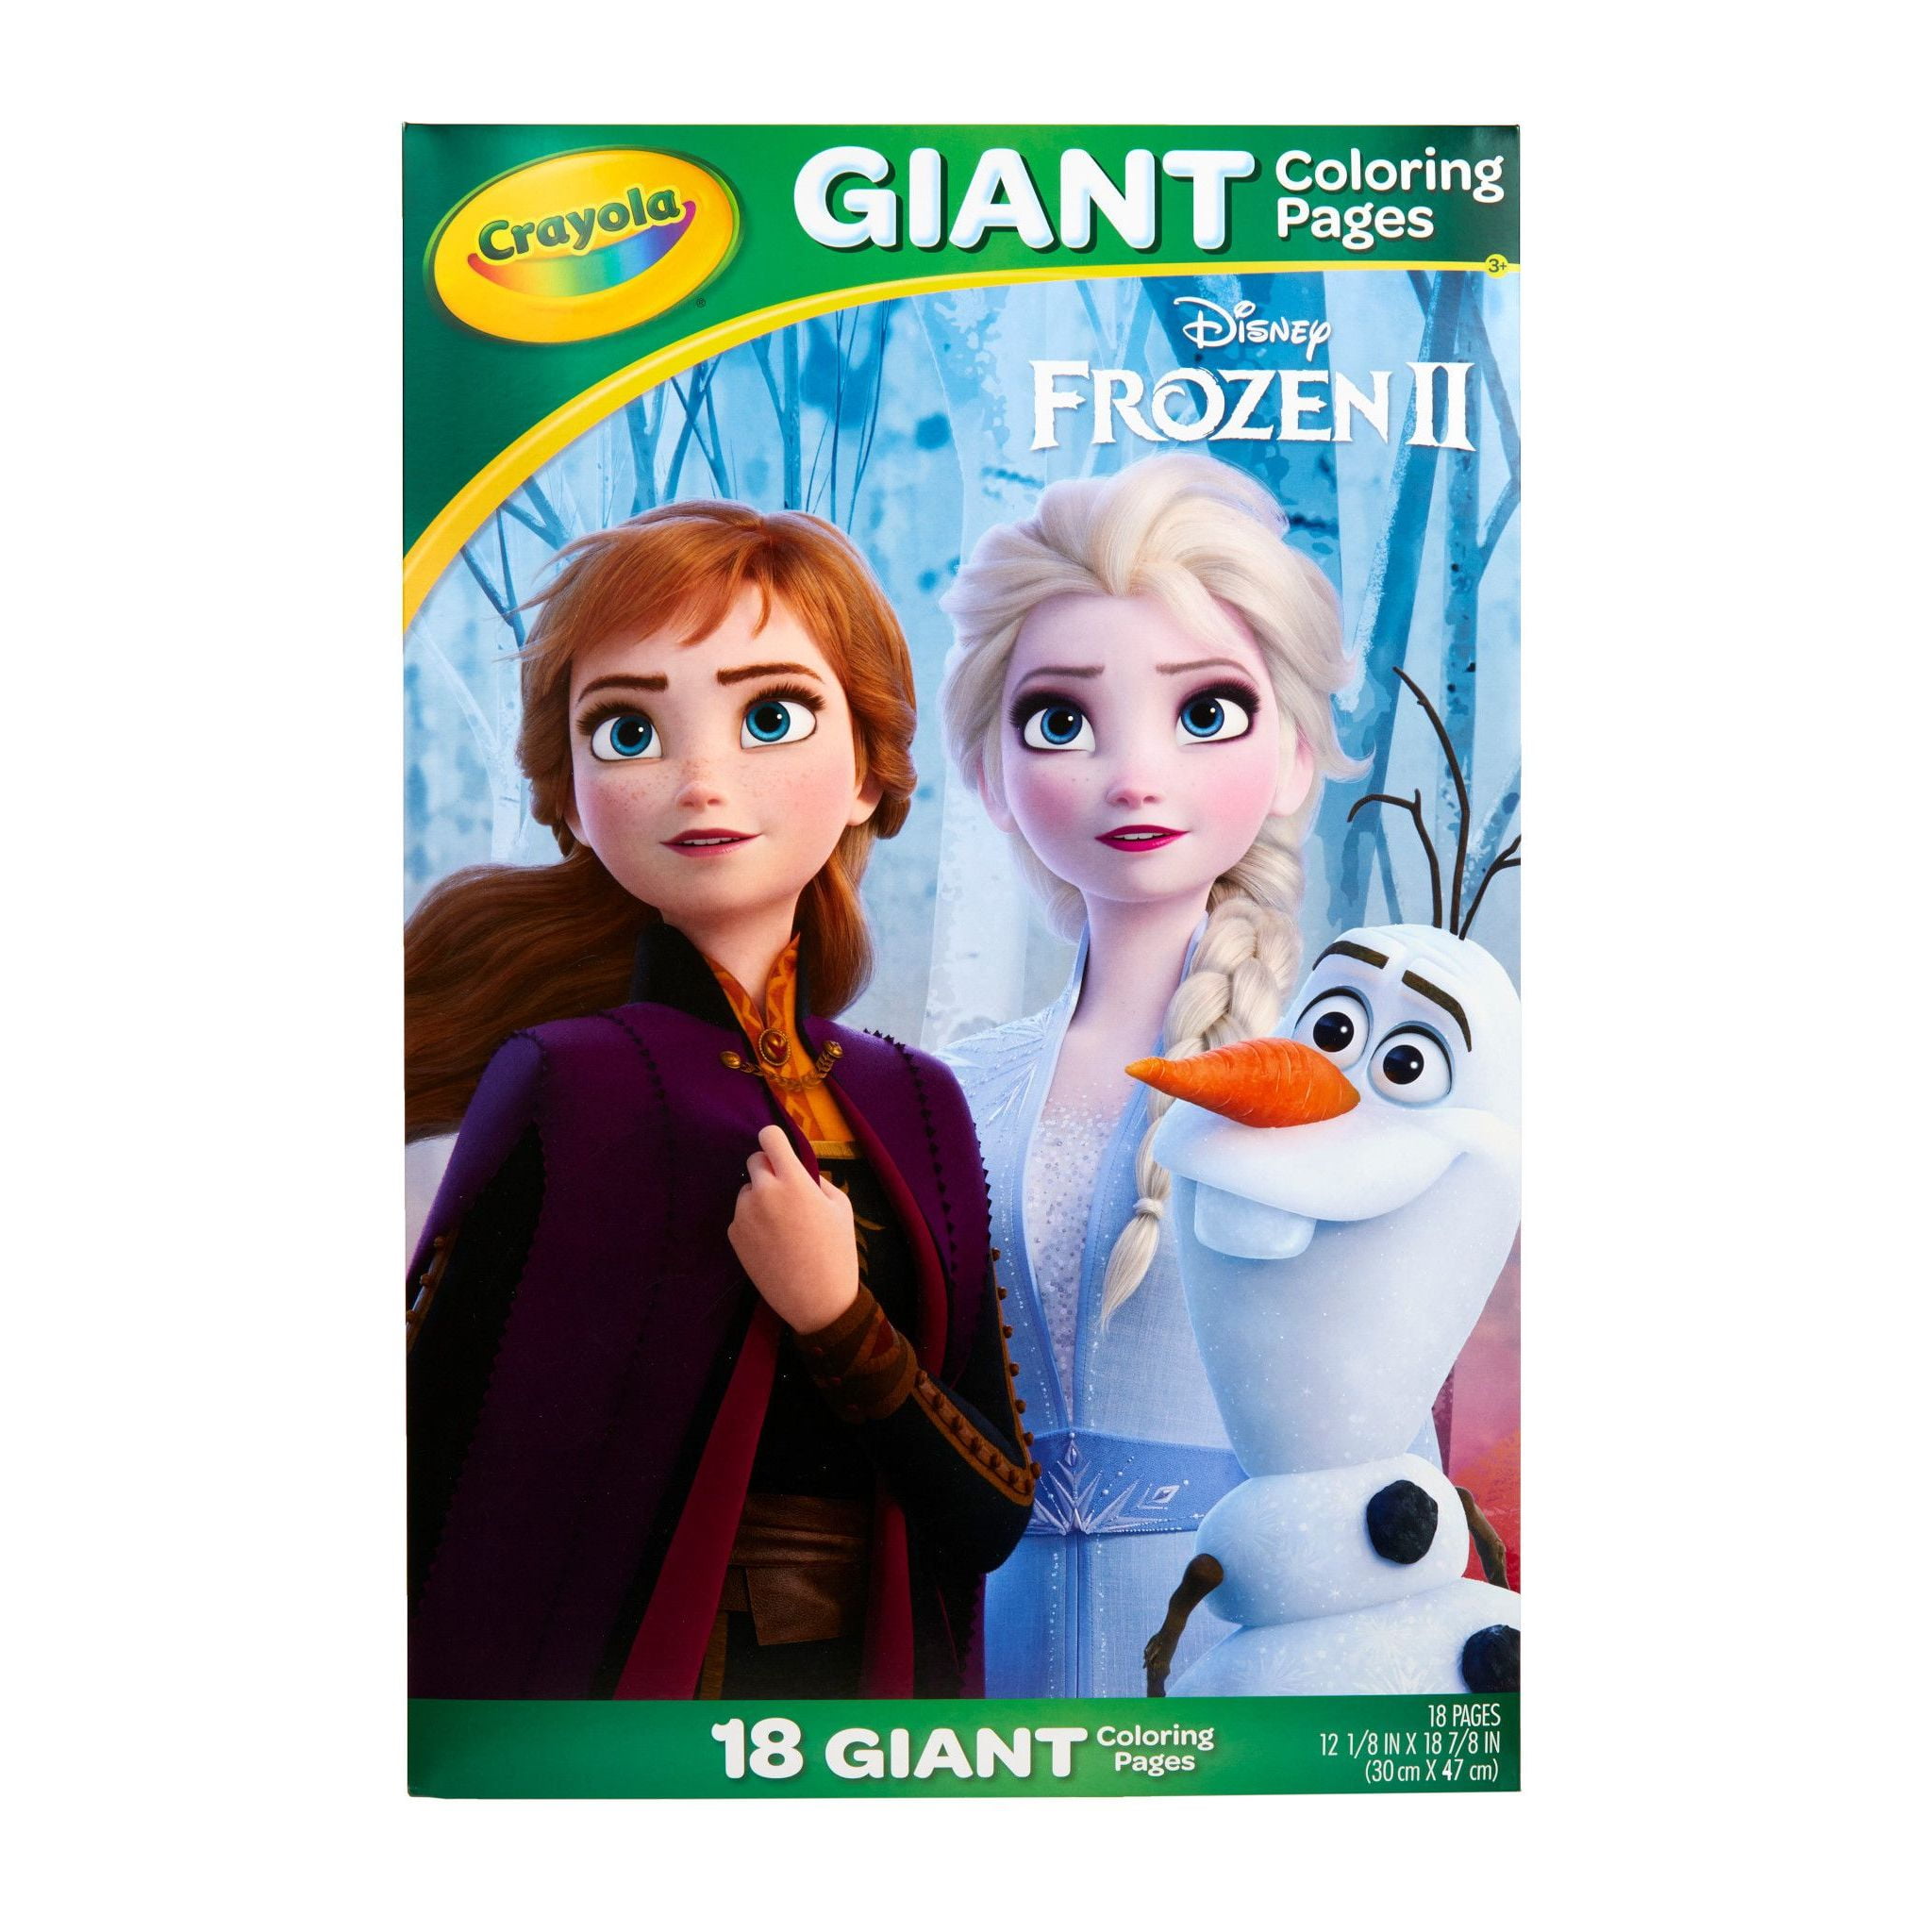 Crayola Giant Coloring Featuring Frozen 2, School Supplies, Child, 18 Pages